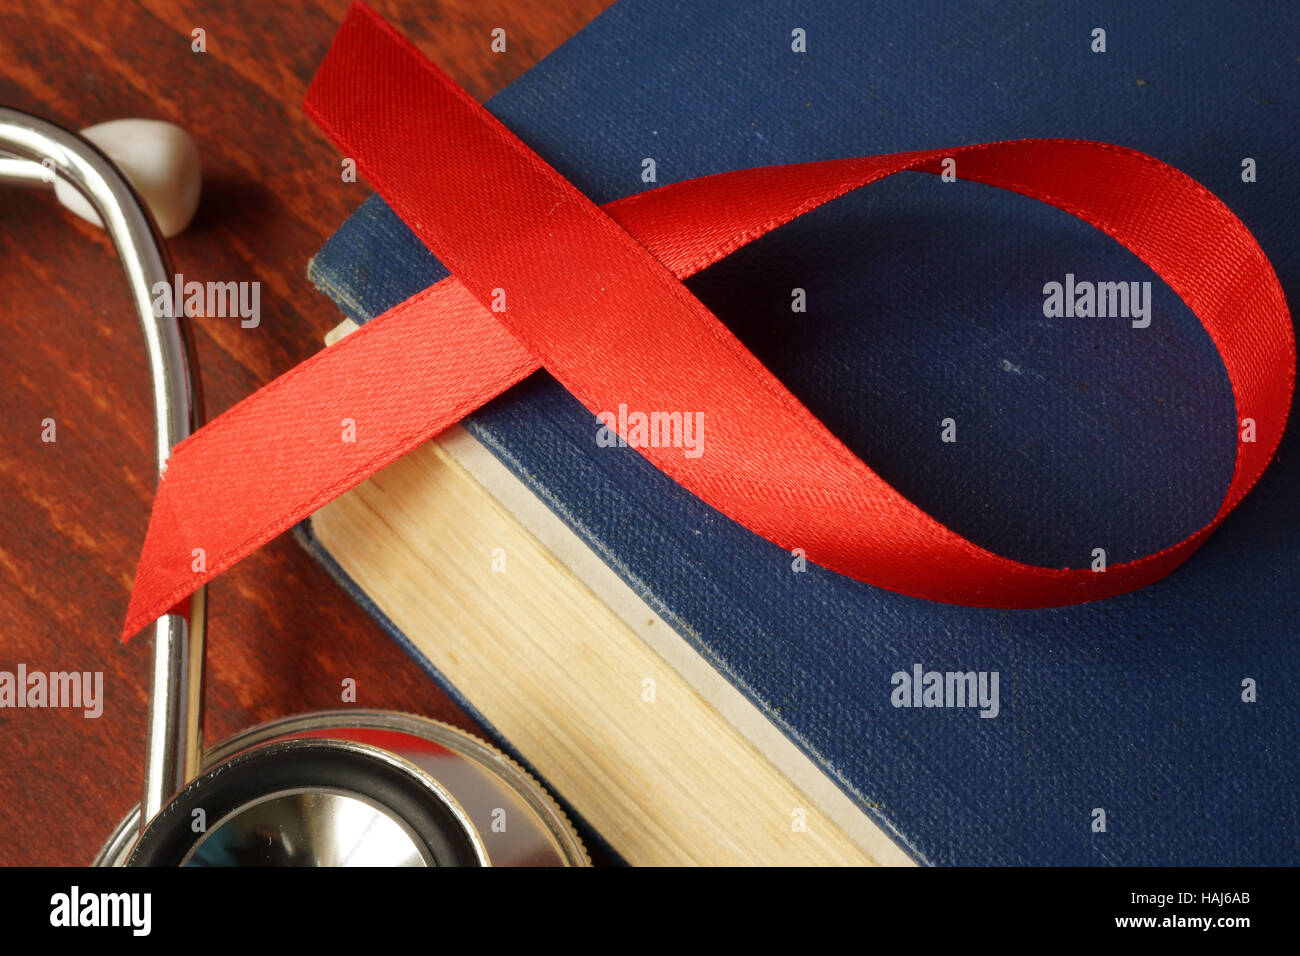 HIV AIDS diagnosis.  Awareness red ribbon on a book. Stock Photo